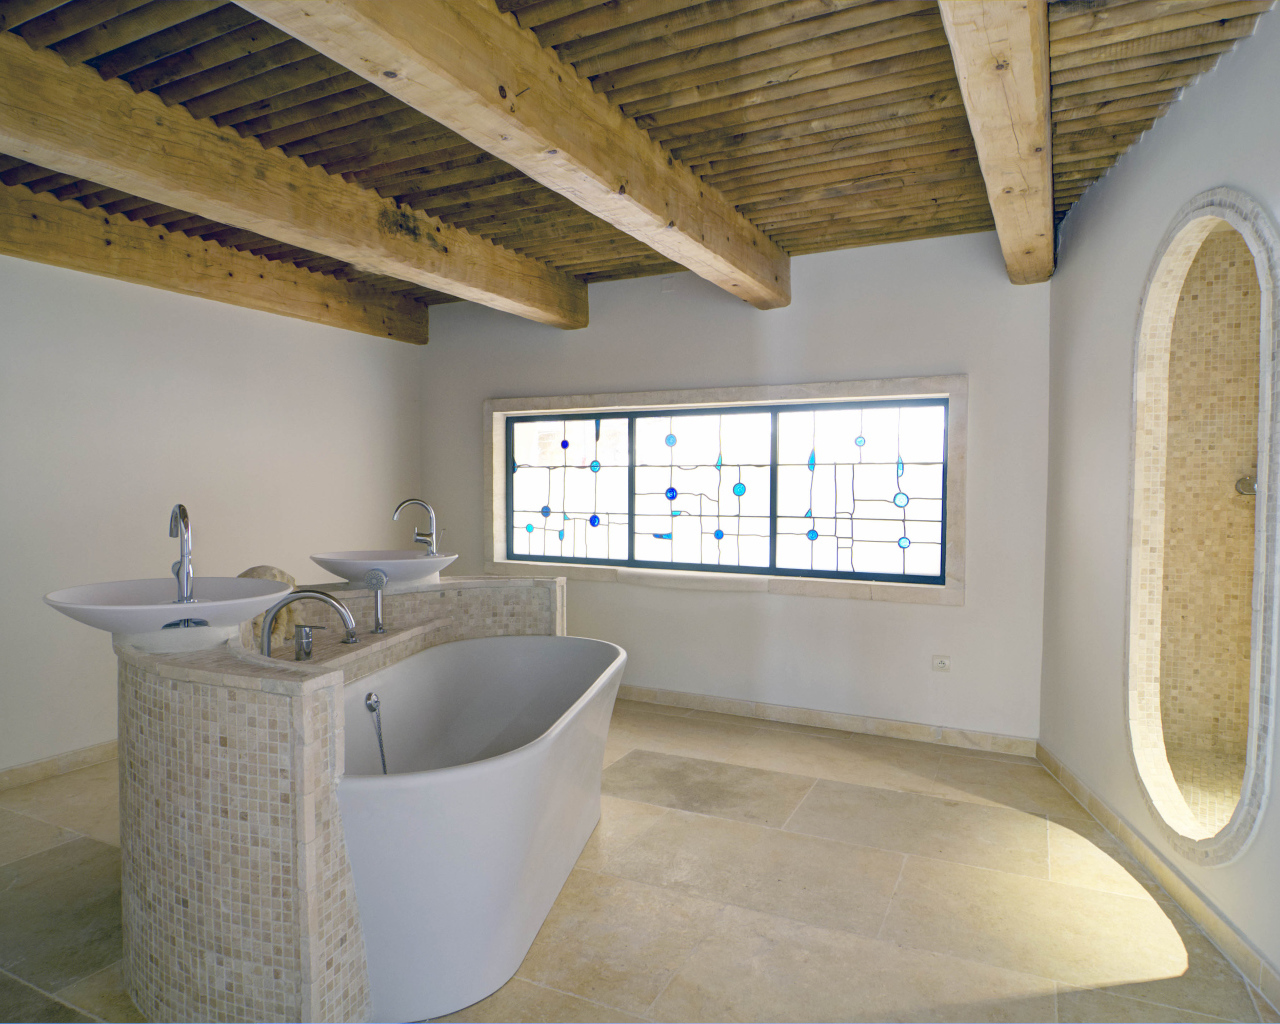 Bathroom with wooden roof